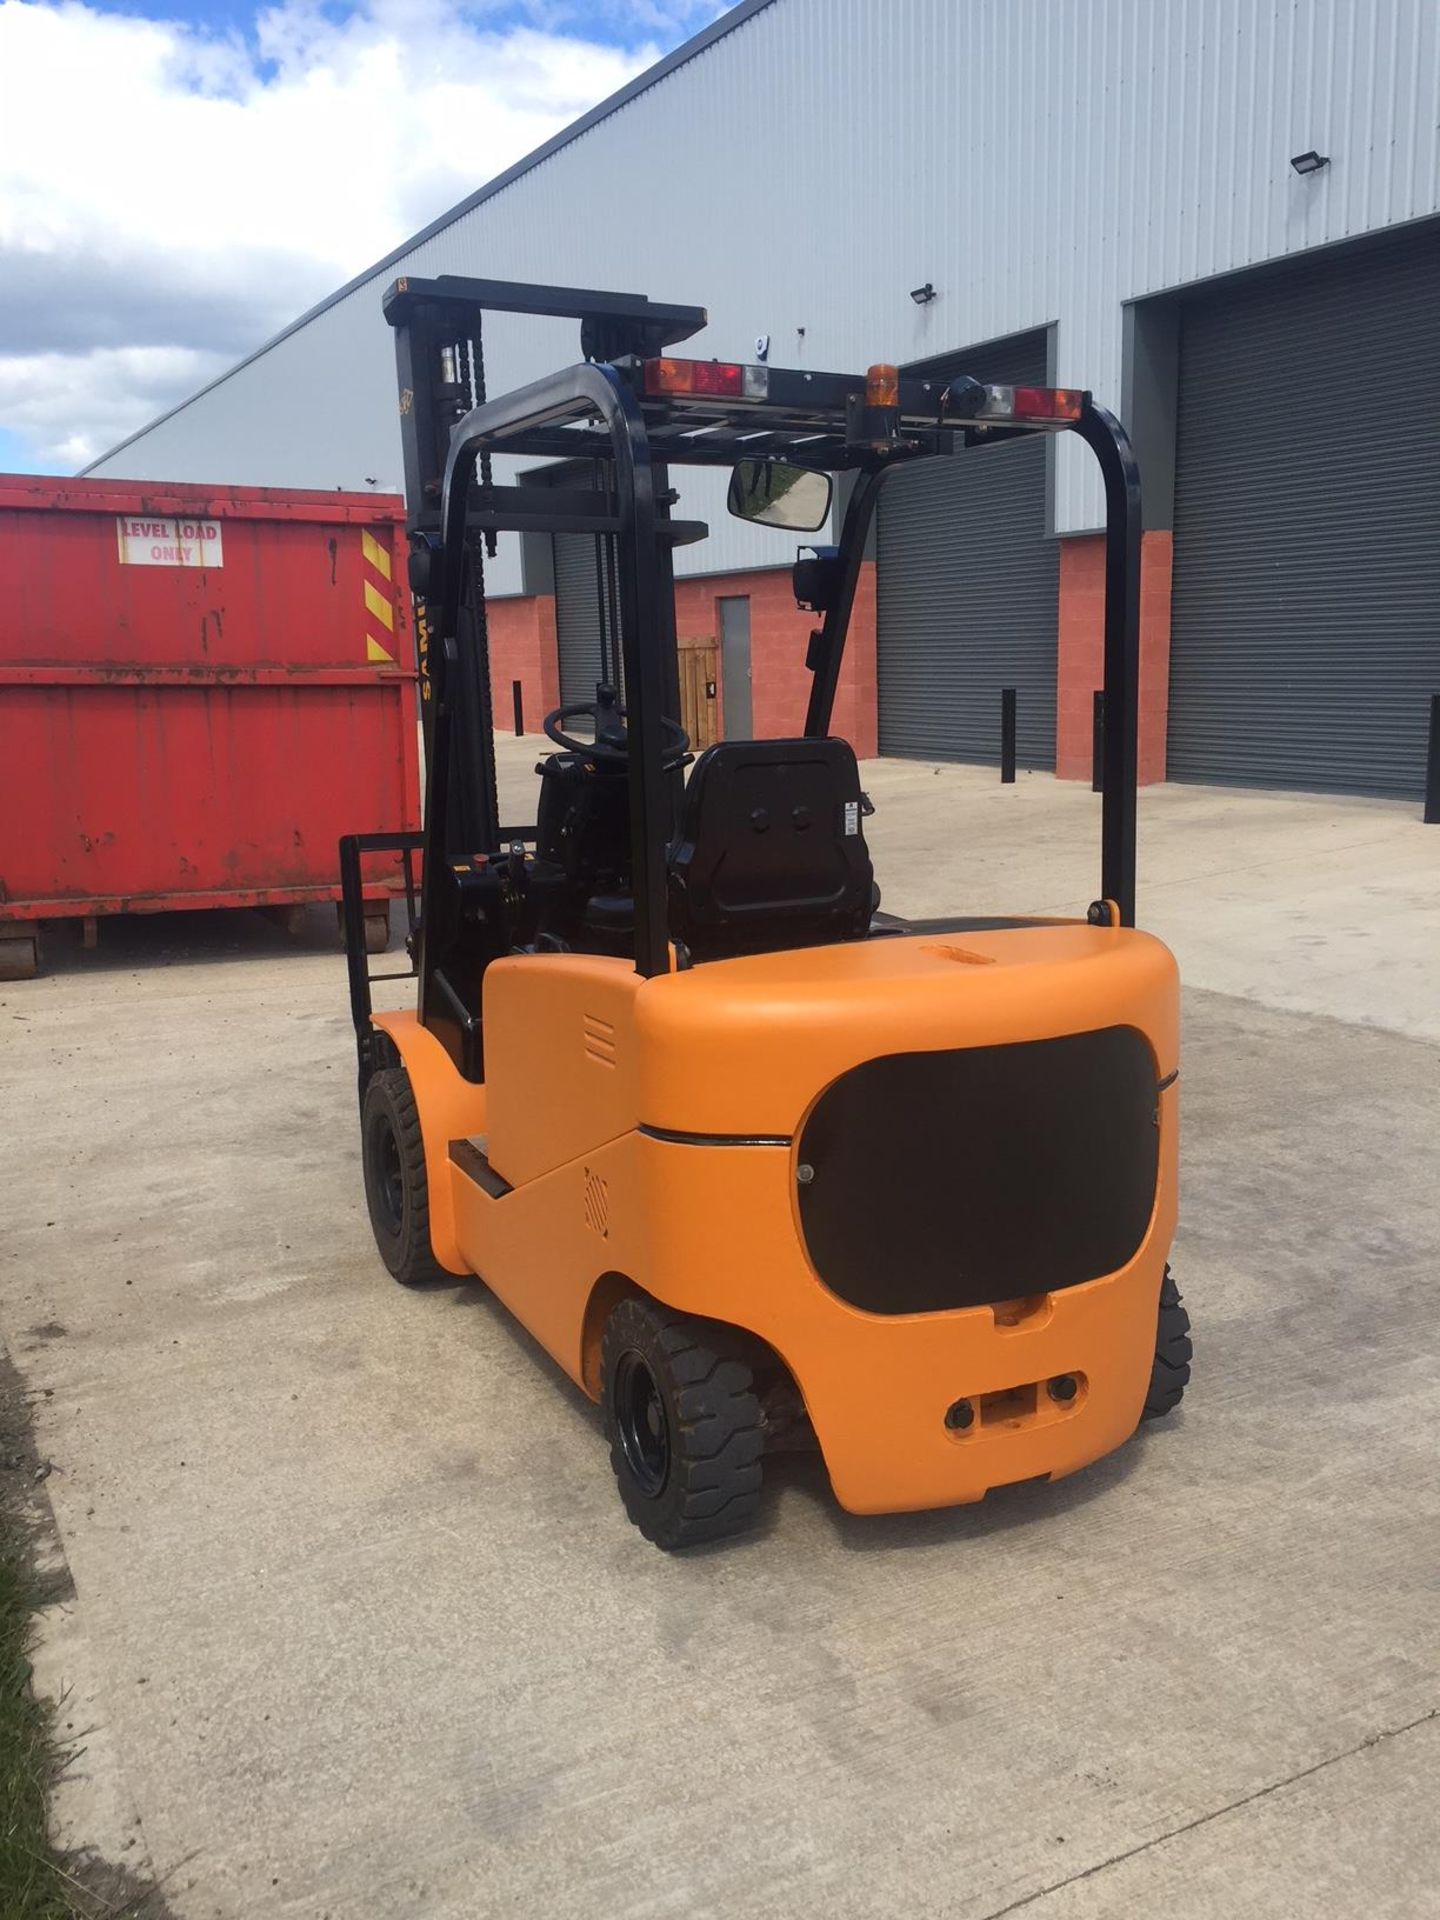 Sam-uk electric counterbalance fork lift truck - Image 6 of 9